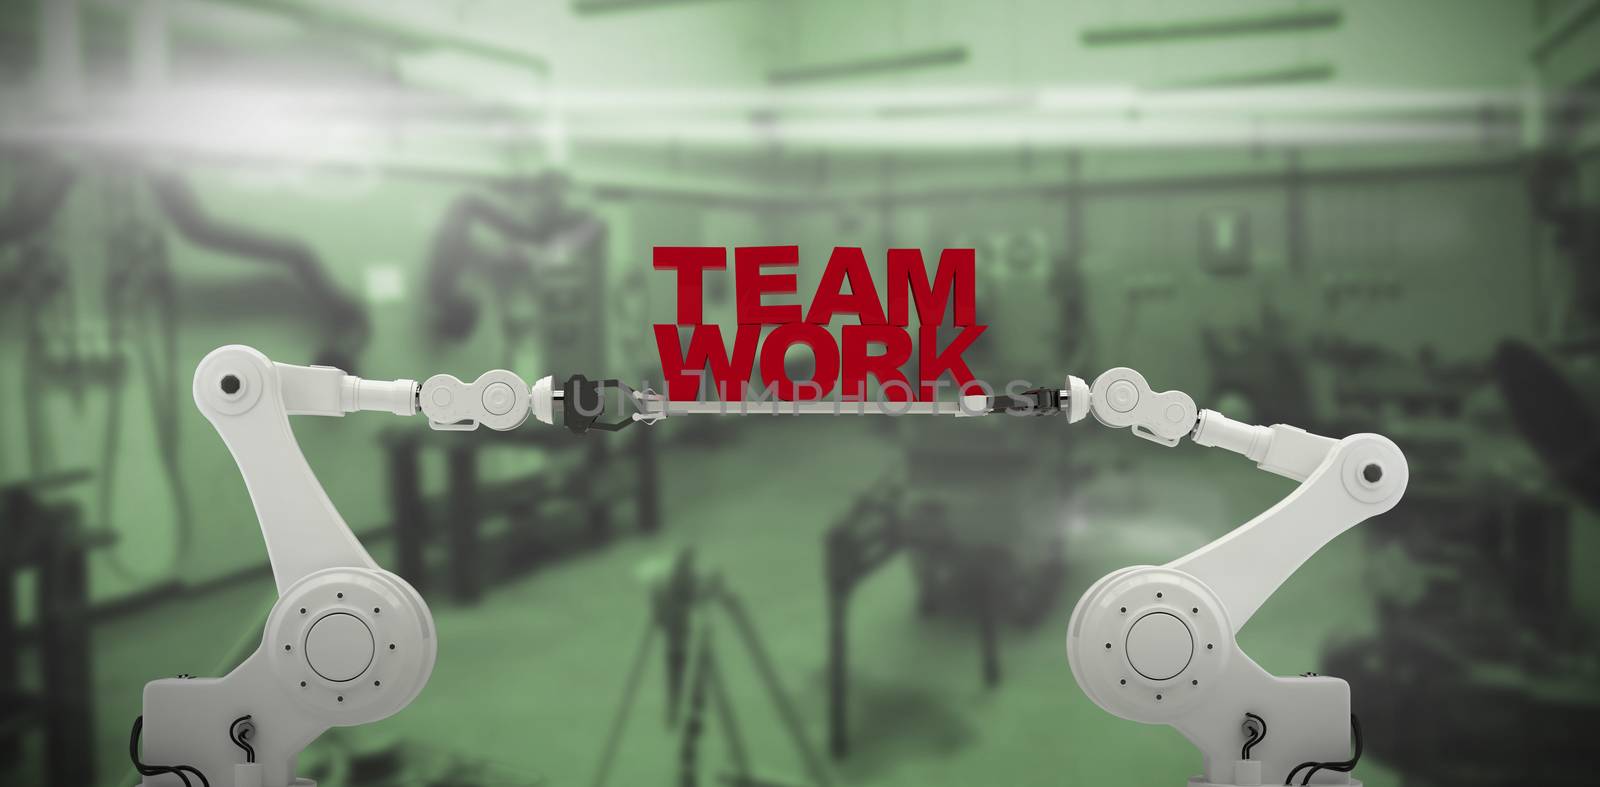 Composite image of digitally composite image of robotic hand holding red team work text by Wavebreakmedia